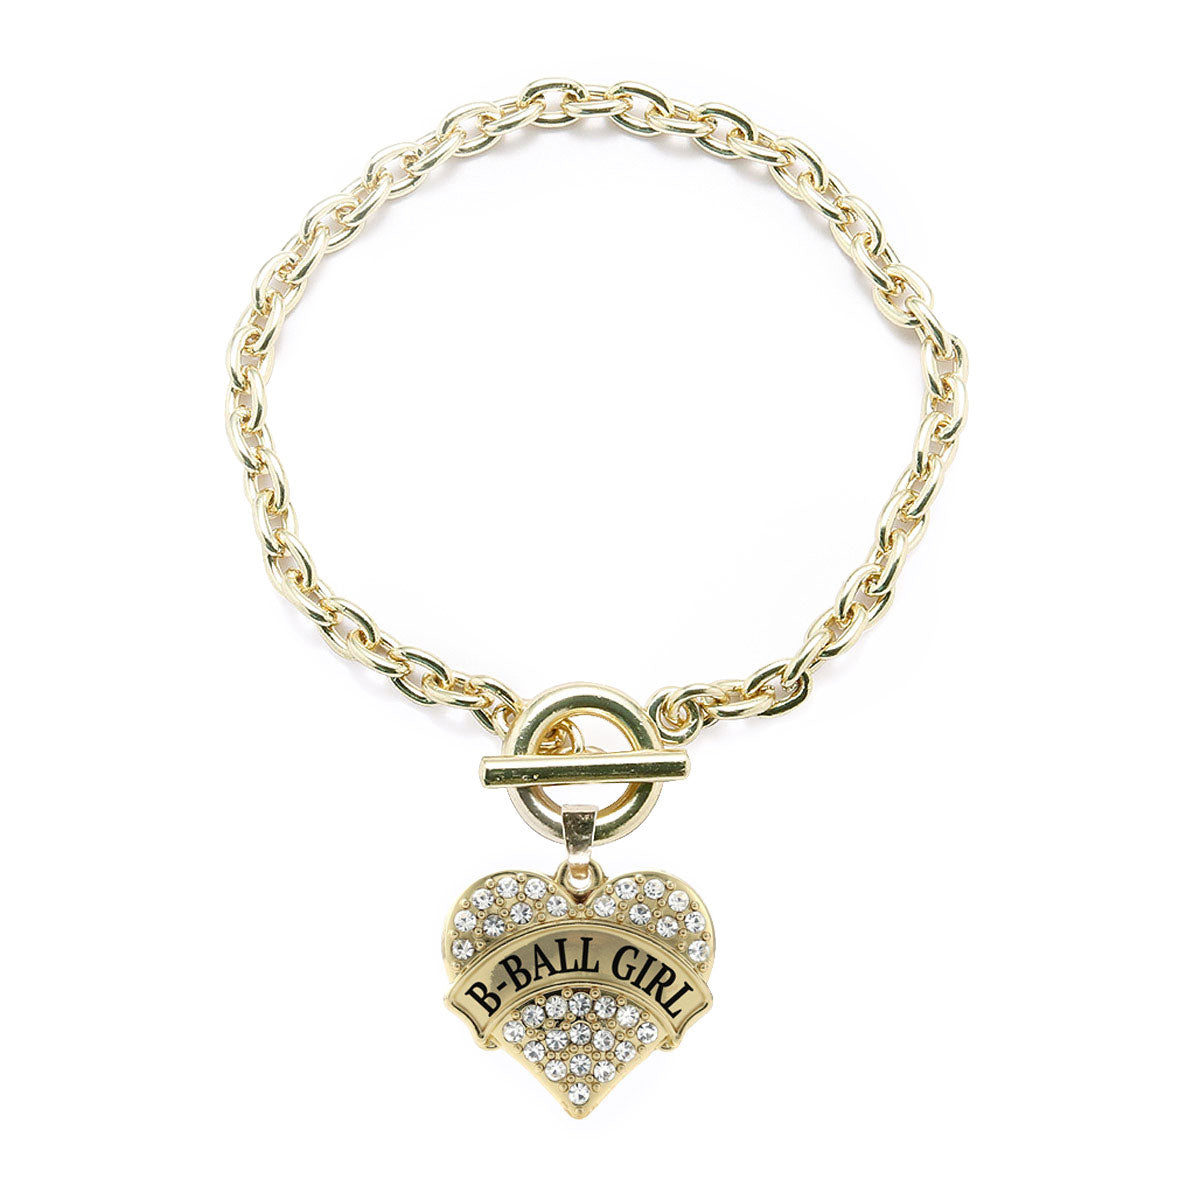 Gold BBall Girl Pave Heart Charm Toggle Bracelet